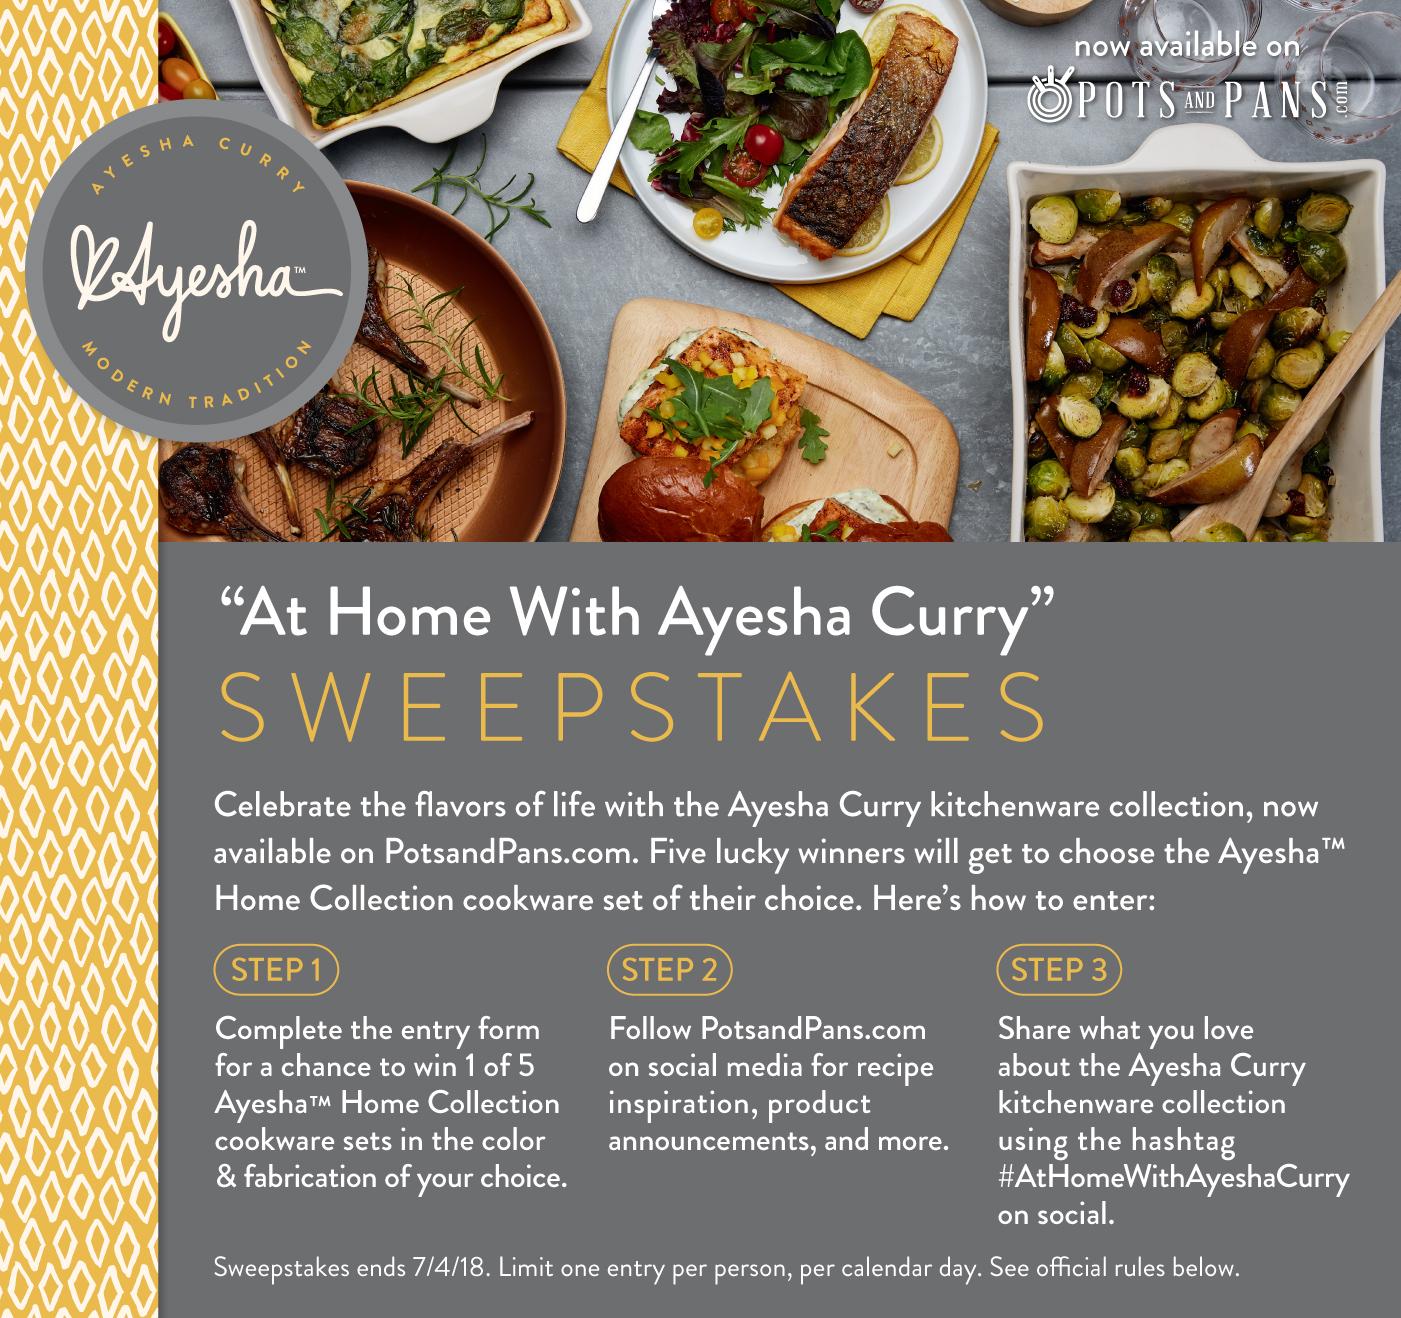 Celebrate the flavors of life with Ayesha Curry kitchenware collection, now available on PotsandPans.com. Five lucky winners will get to choose the Ayesha Home Collection cookware set of their choice